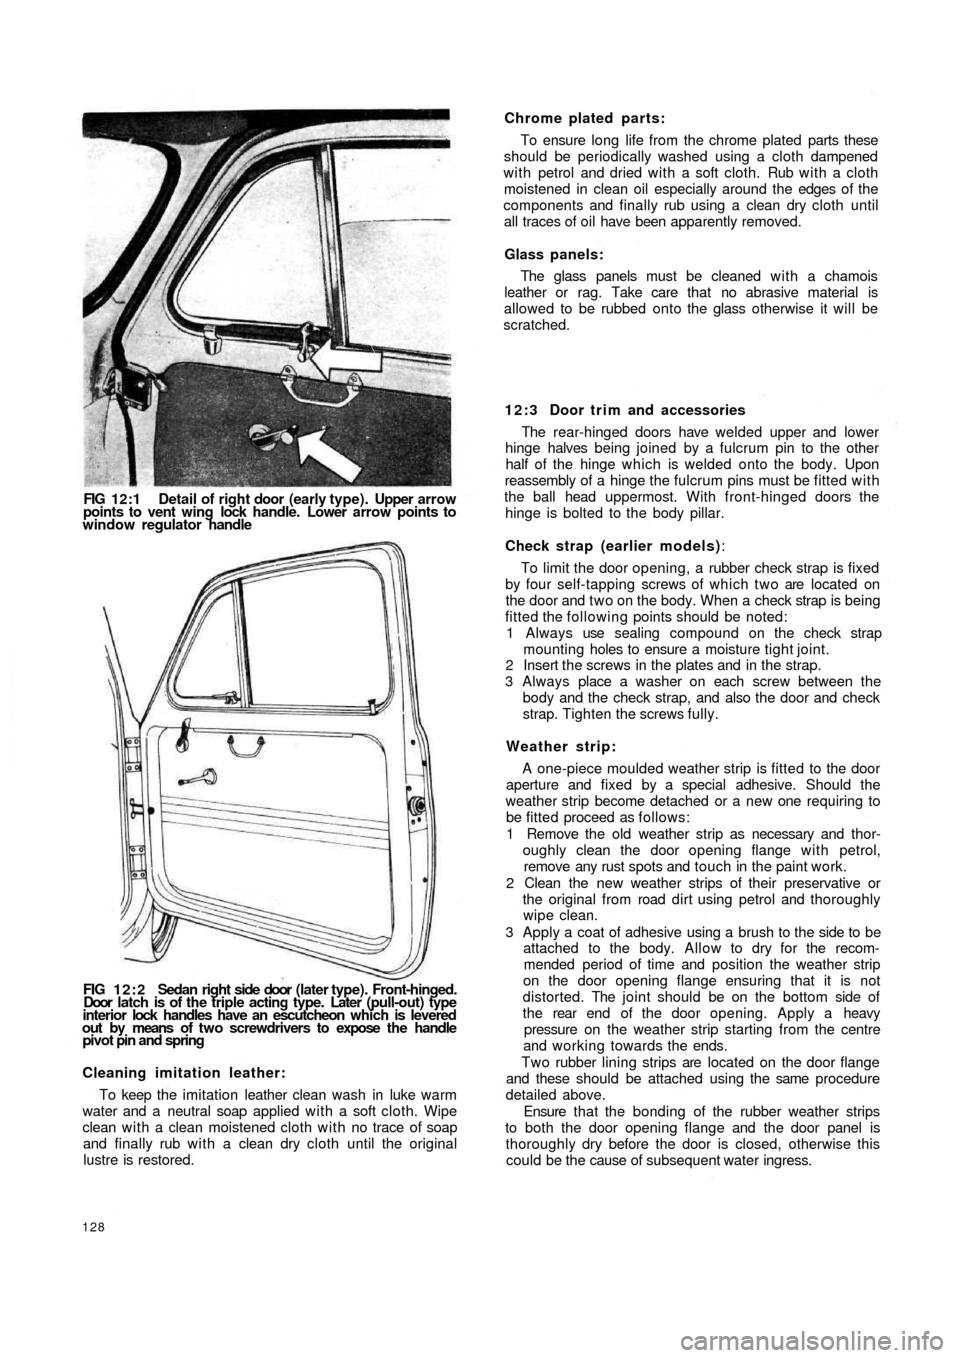 FIAT 500 1959 1.G Workshop Manual FIG 12:1 Detail of right door (early type). Upper arrow
points to  vent wing lock  handle. Lower arrow points to
window regulator handle
FIG  1 2 : 2   Sedan  right  side  door  (later type). Front-hi